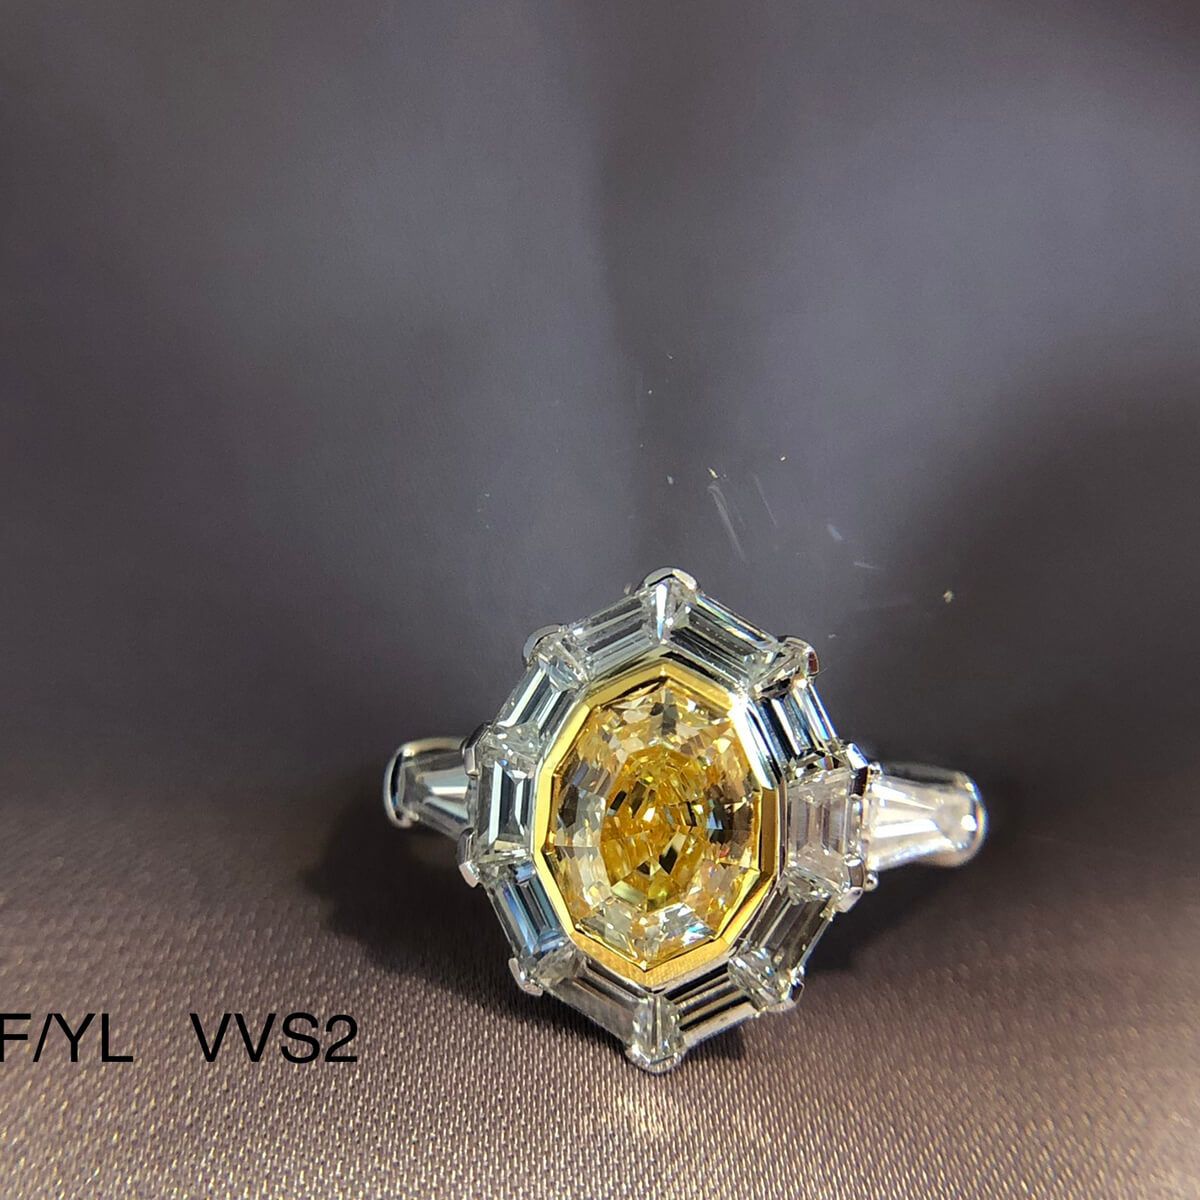 Fancy Yellow Diamond Ring, 1.06 Ct. (2.33 Ct. TW), Marquise shape, GIA Certified, 2141529304